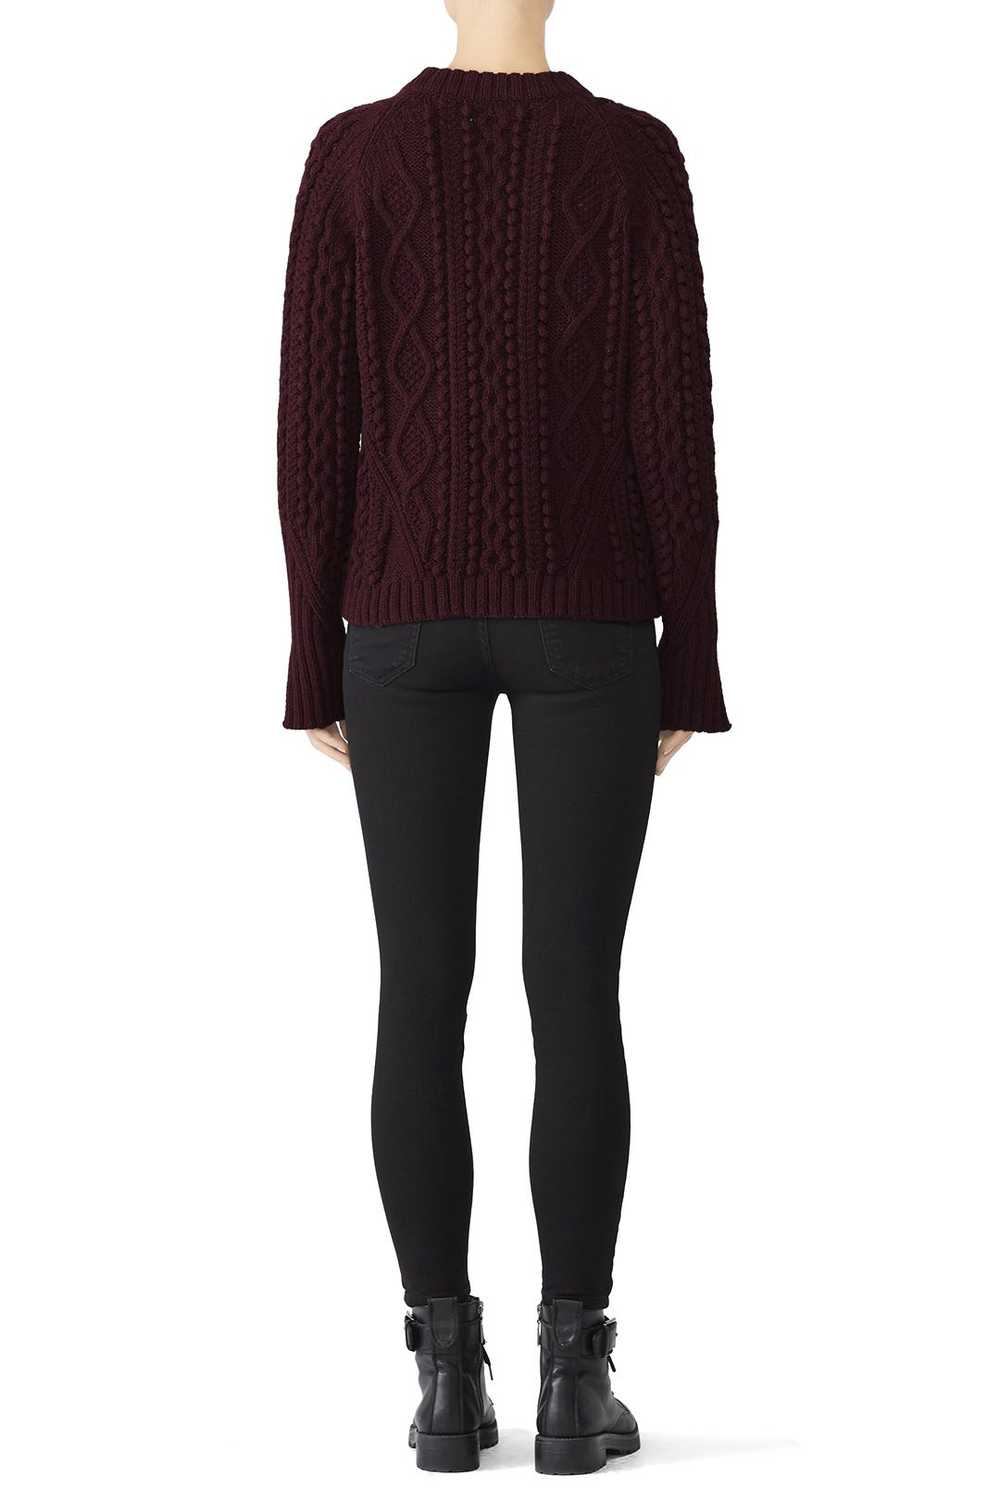 3.1 Phillip Lim Popcorn Cable Wool Pullover - image 2